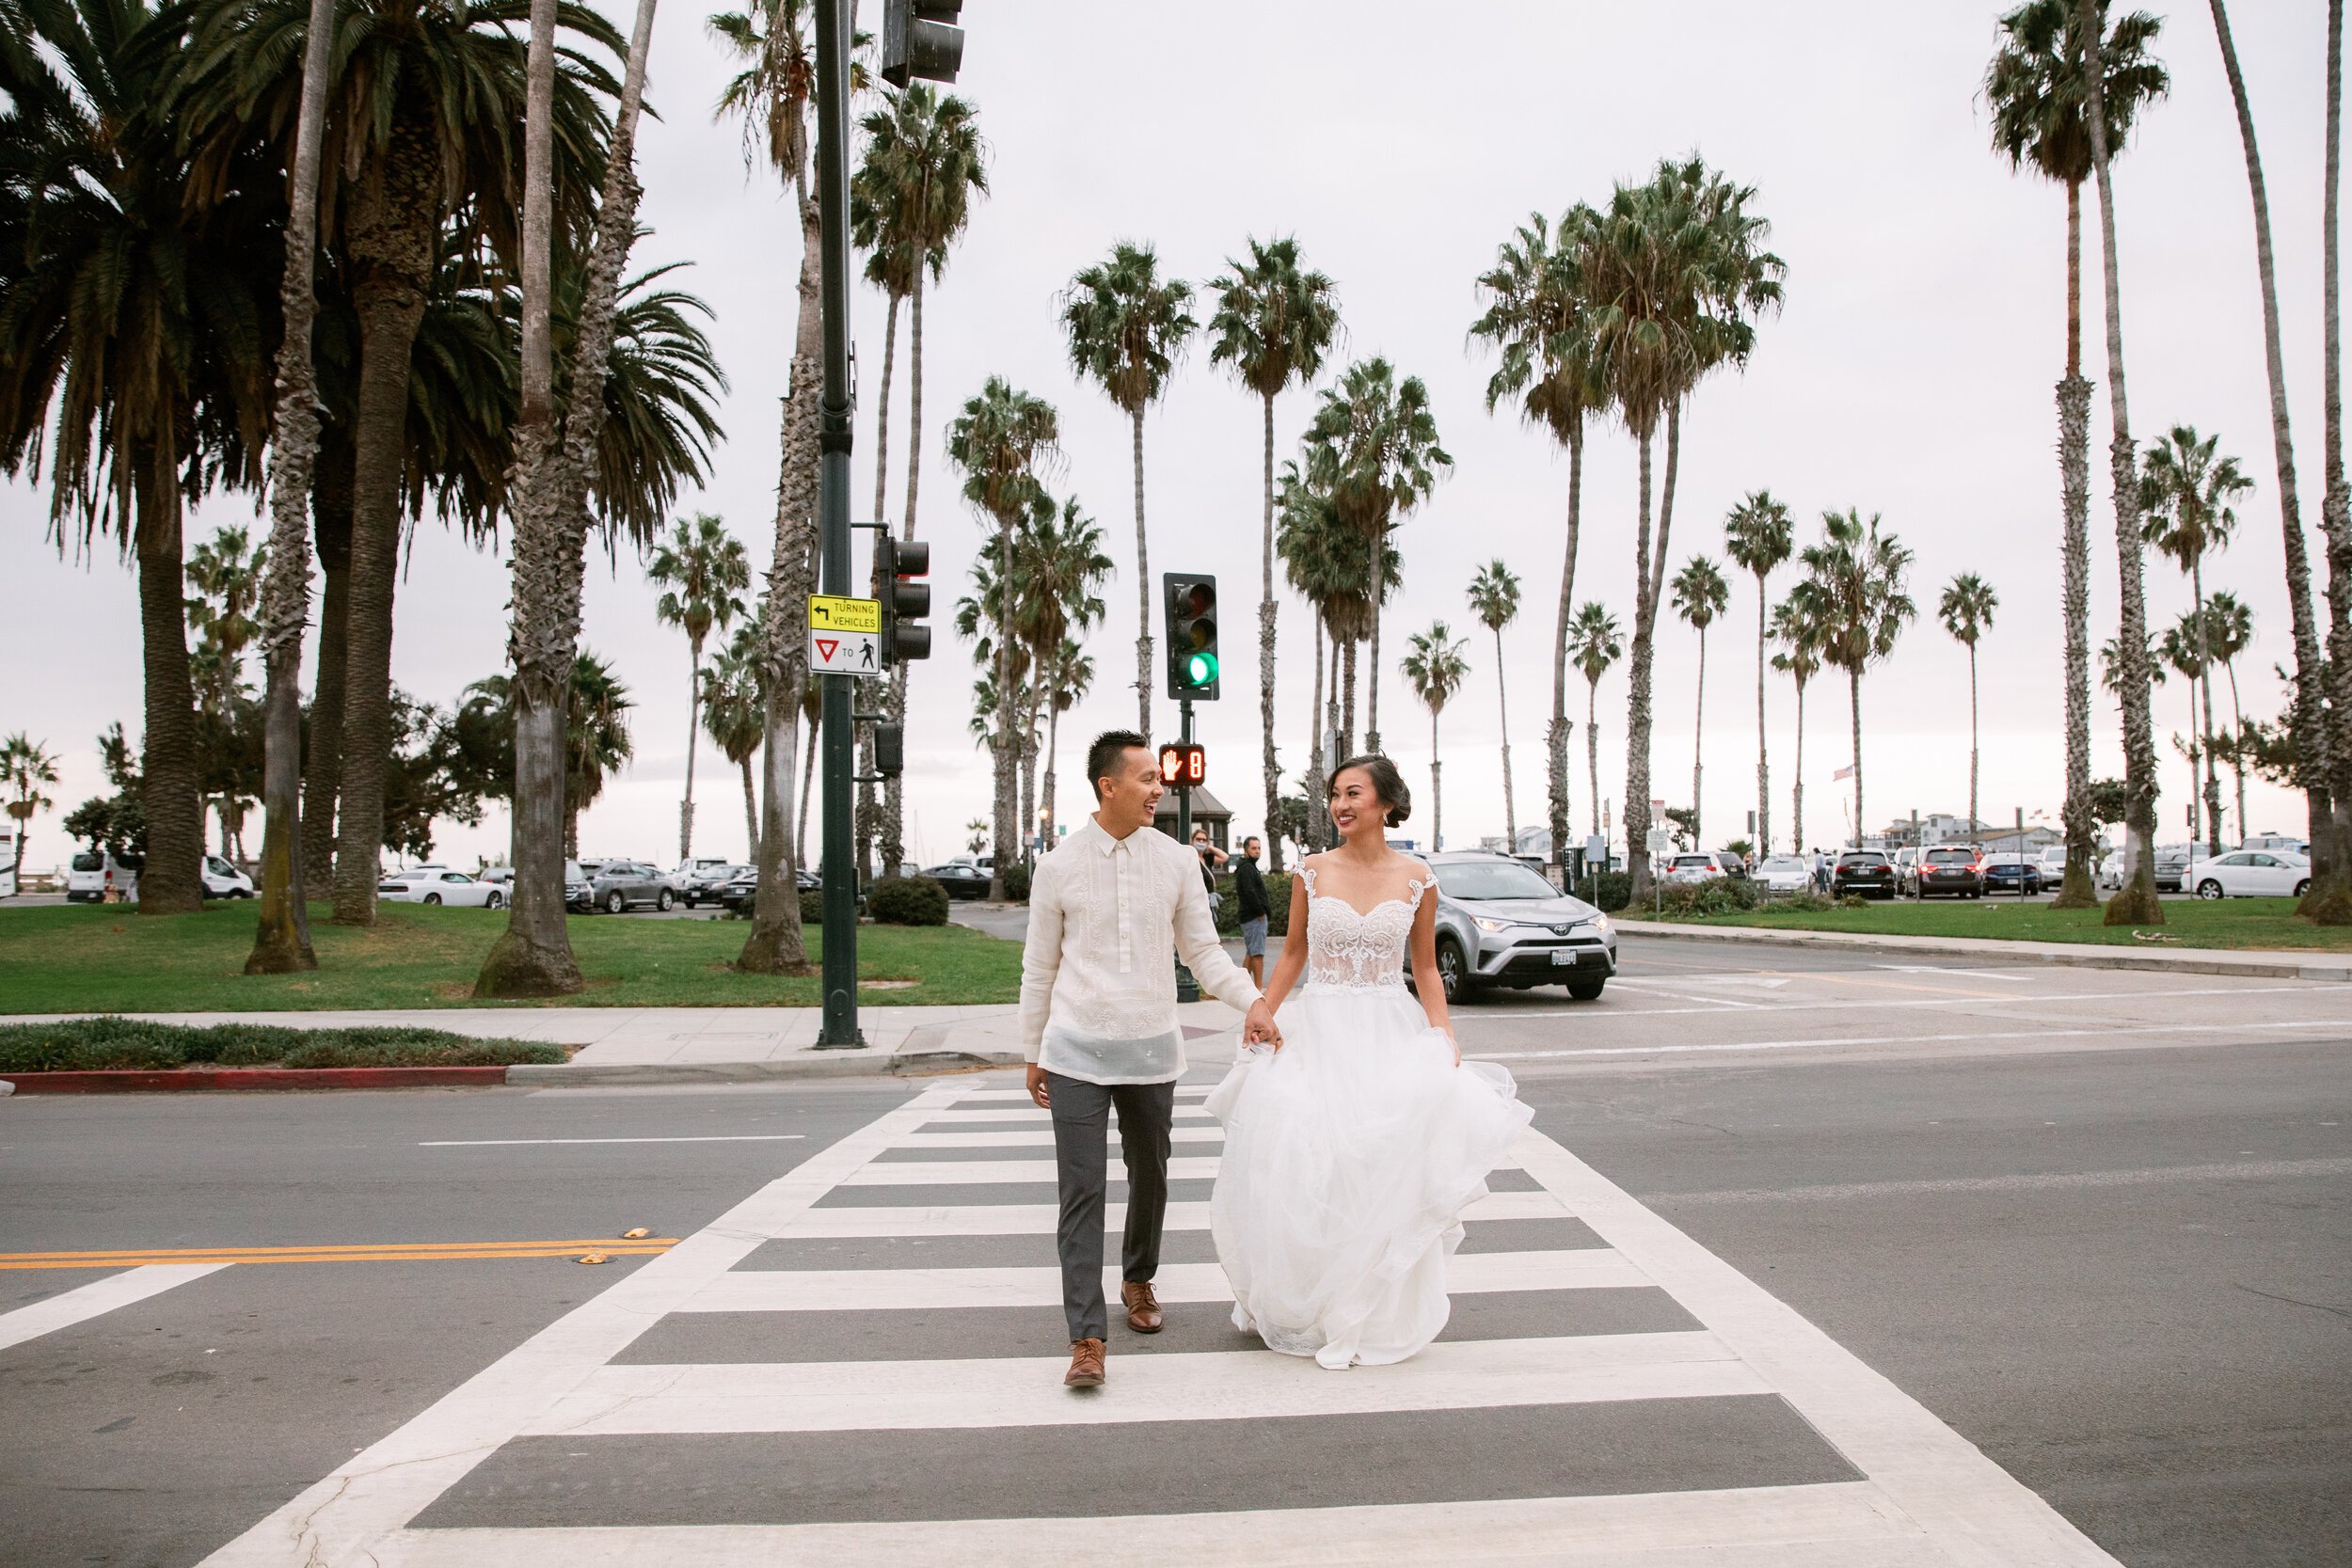 www.santabarbarawedding.com | Events by Fran | Chase Palm Park | Anna Delores Photography | Tangled Lotus | Pineapple Industries | Mila Bridal | Joel Sebastian | Bride and Groom Crossing the Street